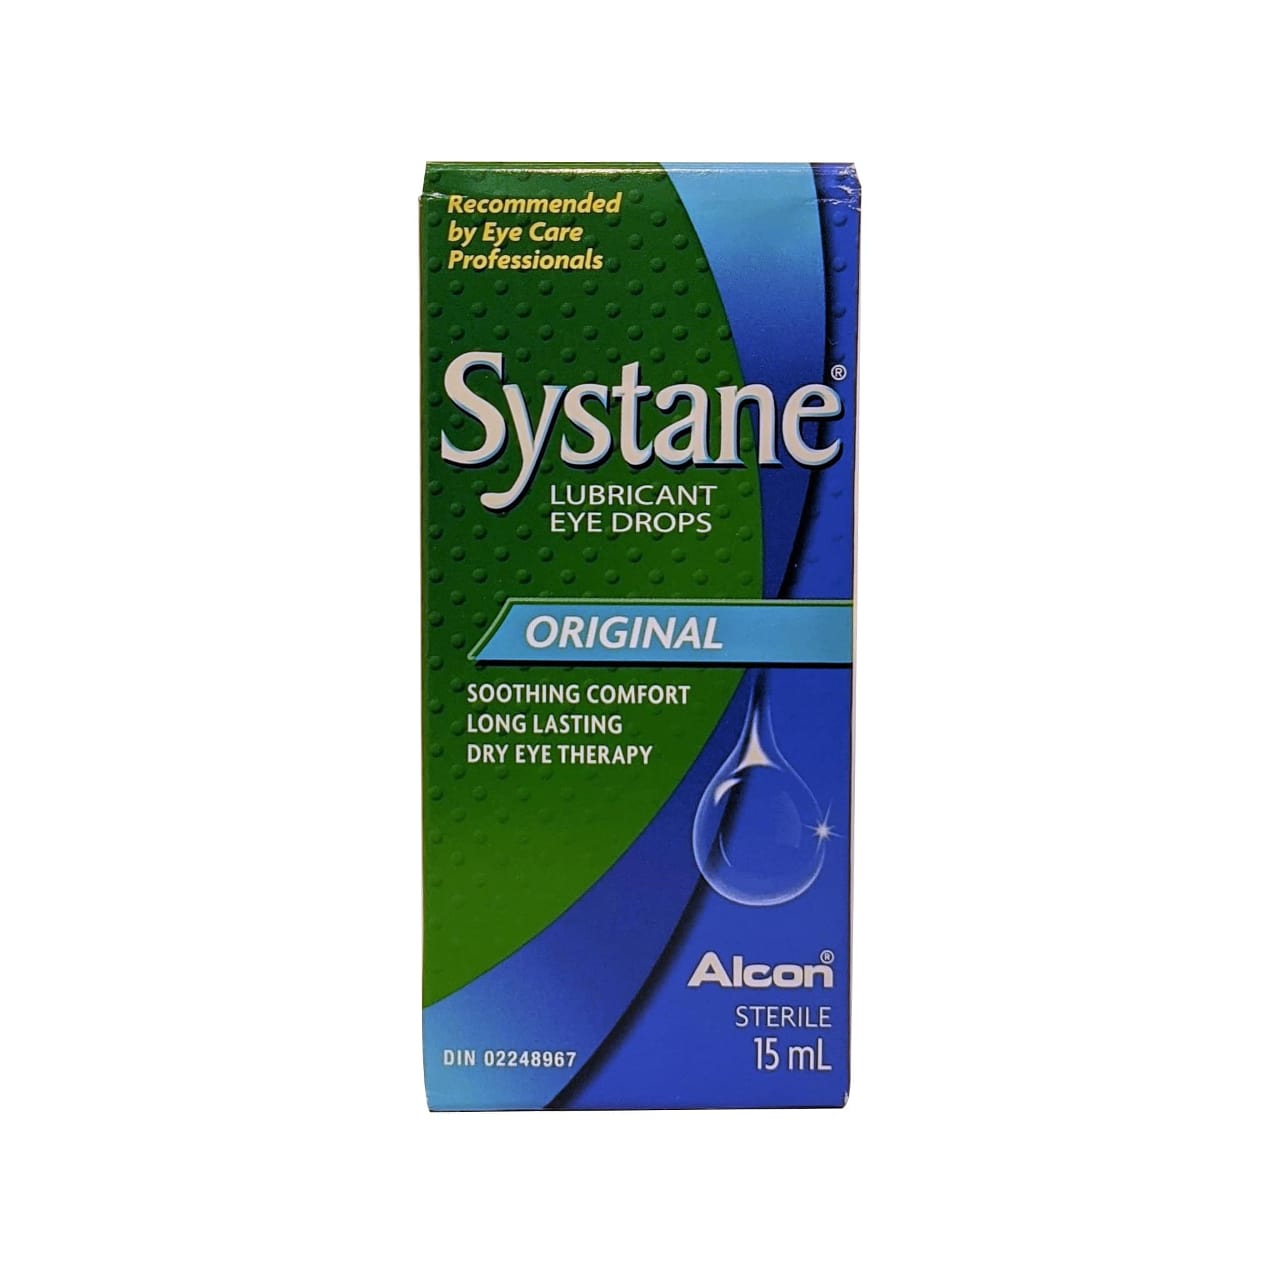 English product label for Alcon Systane Original Lubricant Eye Drops